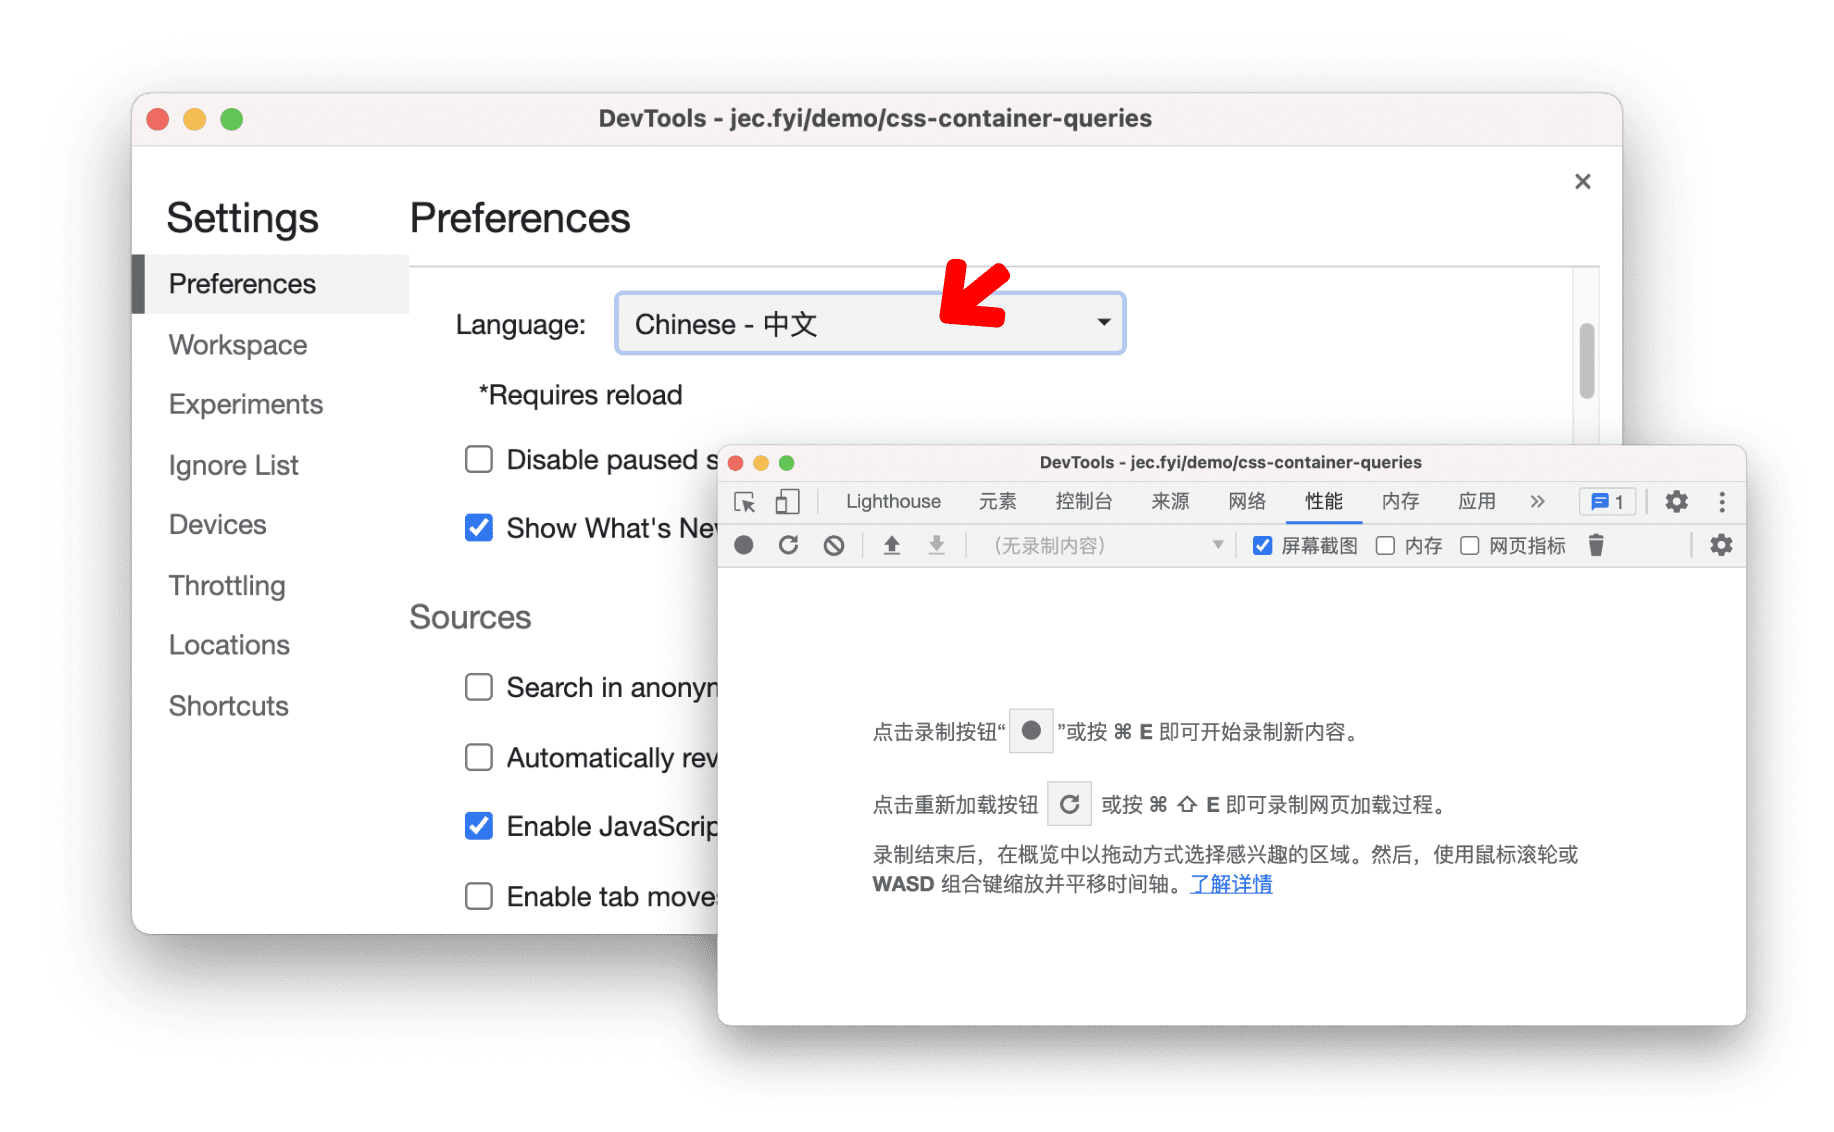 Change language by going to Settings and then Preferences